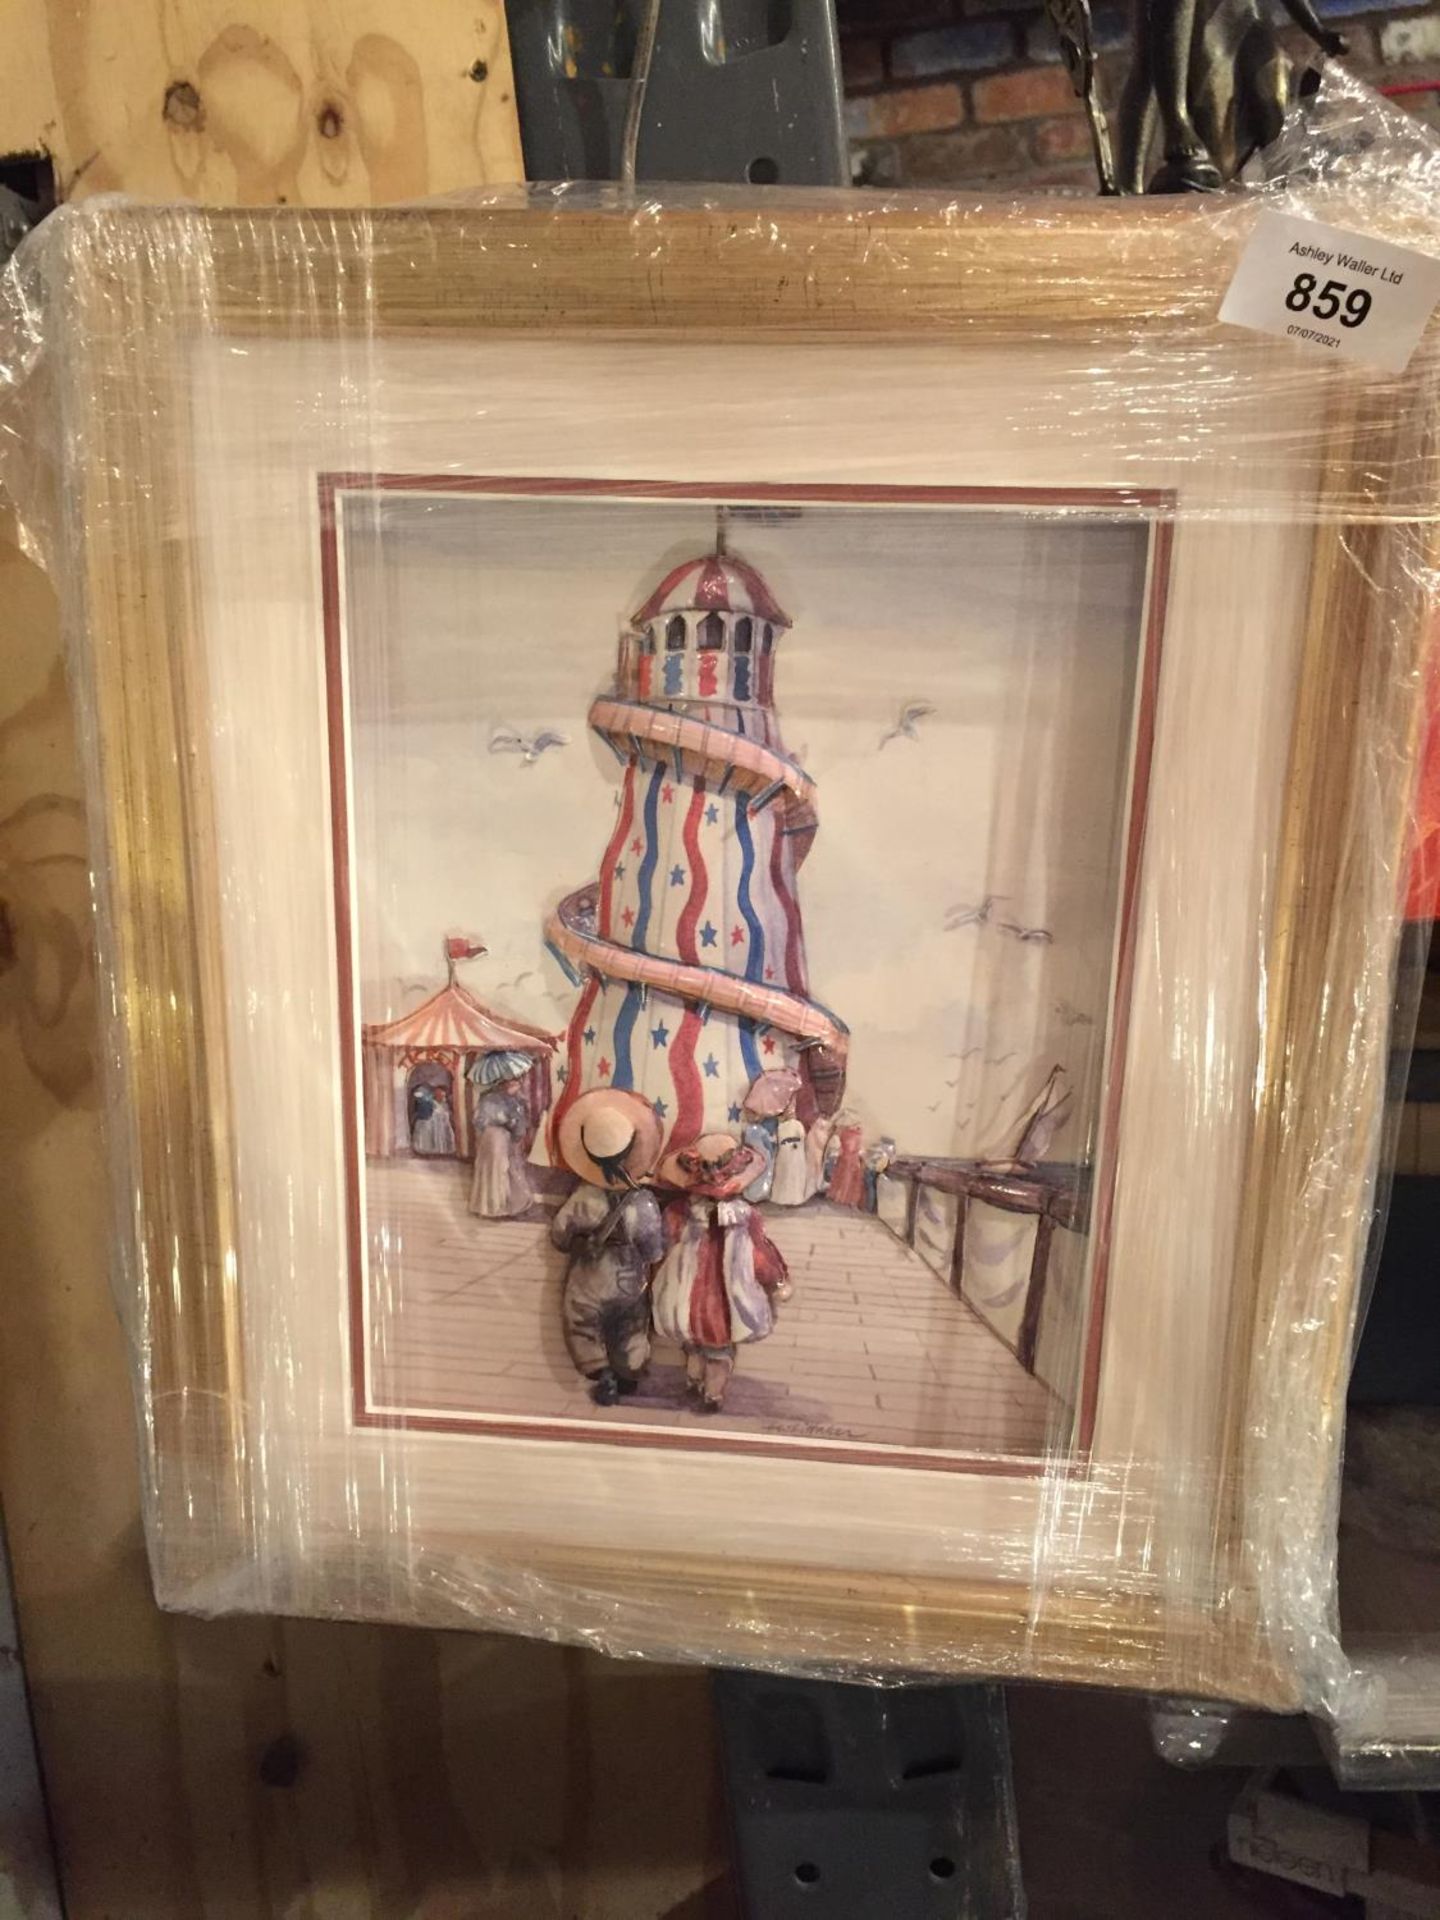 A FRAMED 3D PICTURE OF CHILDREN AT A FAIRGROUND